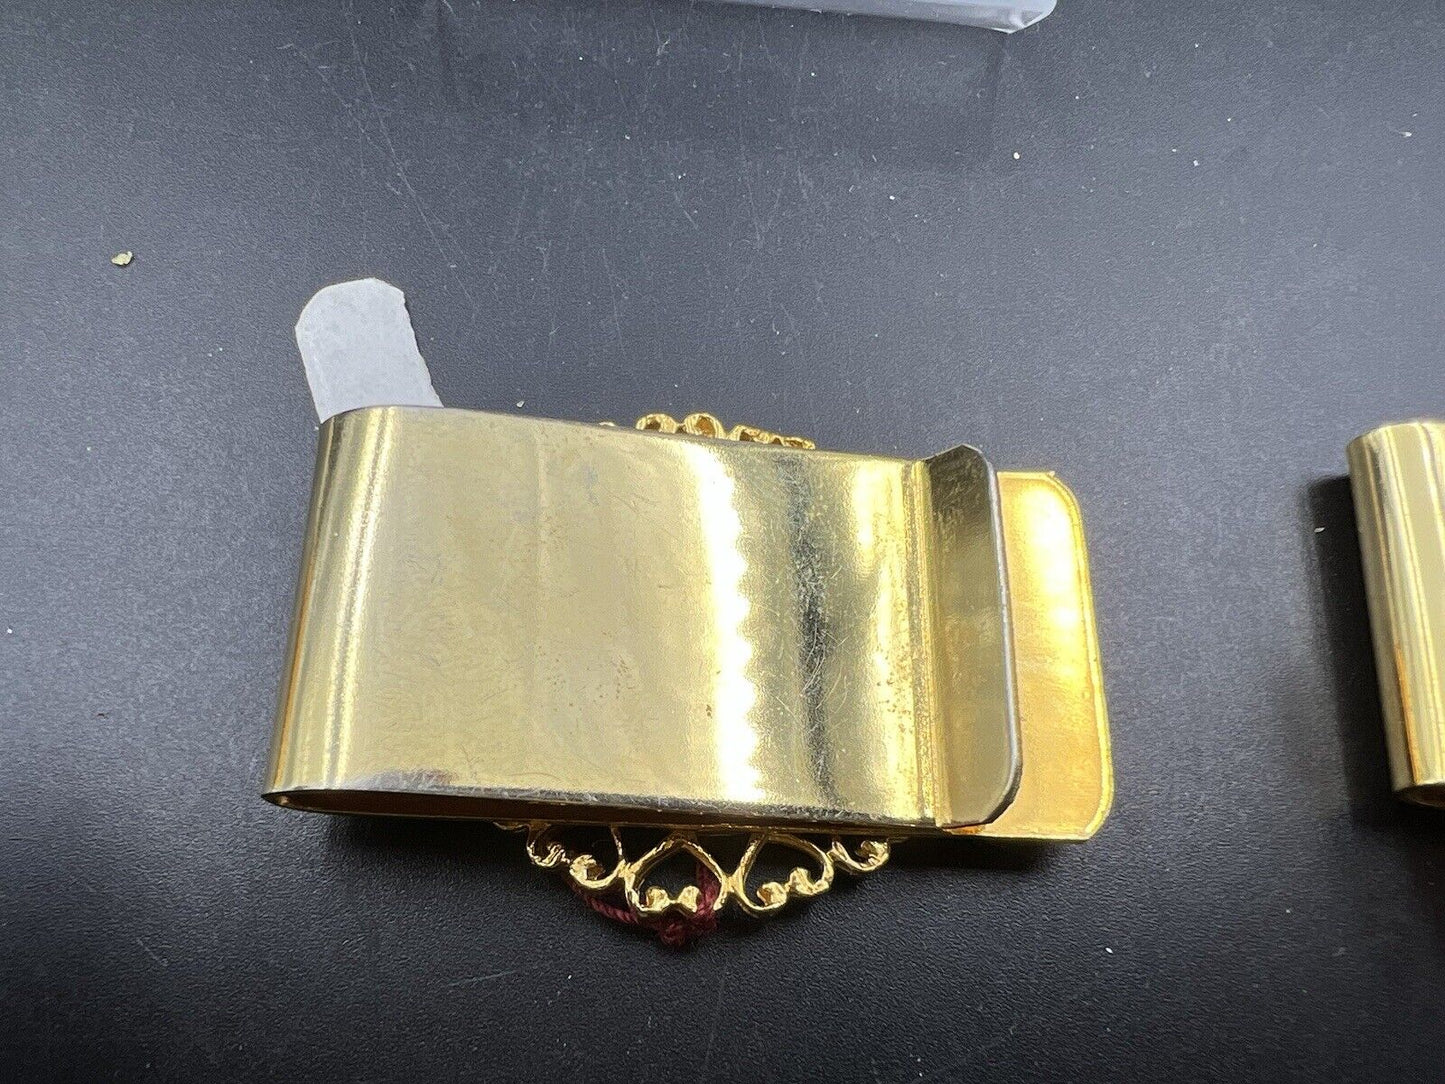 Gold Plated Money Clip with 1911 5c Liberty Head Nickel Coin Used